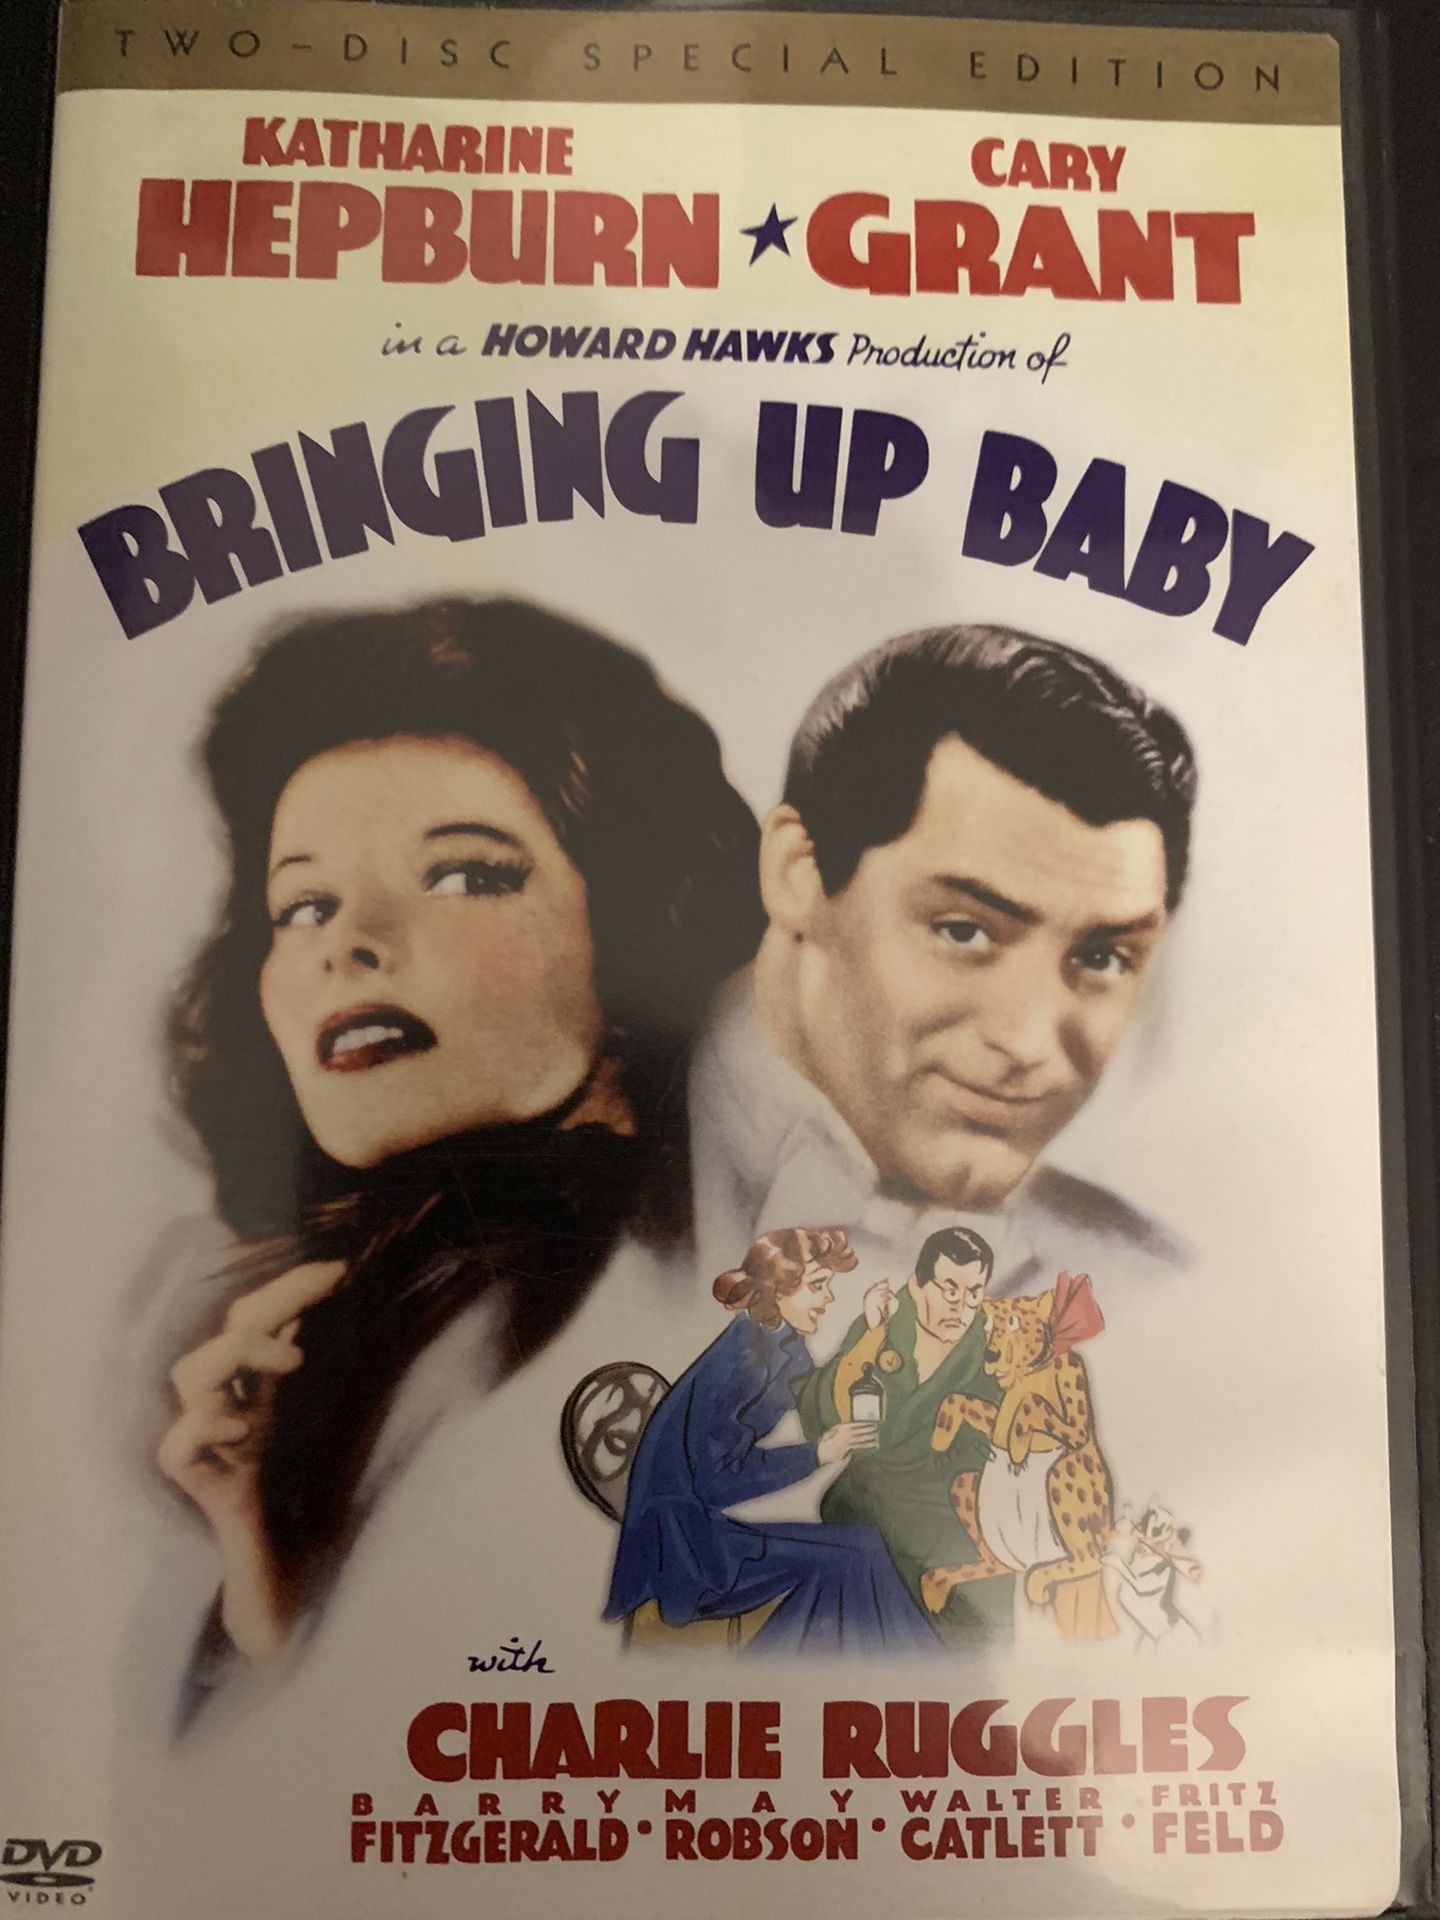 BRINGING UP BABY 2-Disc Special Edition(DVD-1938)Katharine Hepburn + Cary Grant!